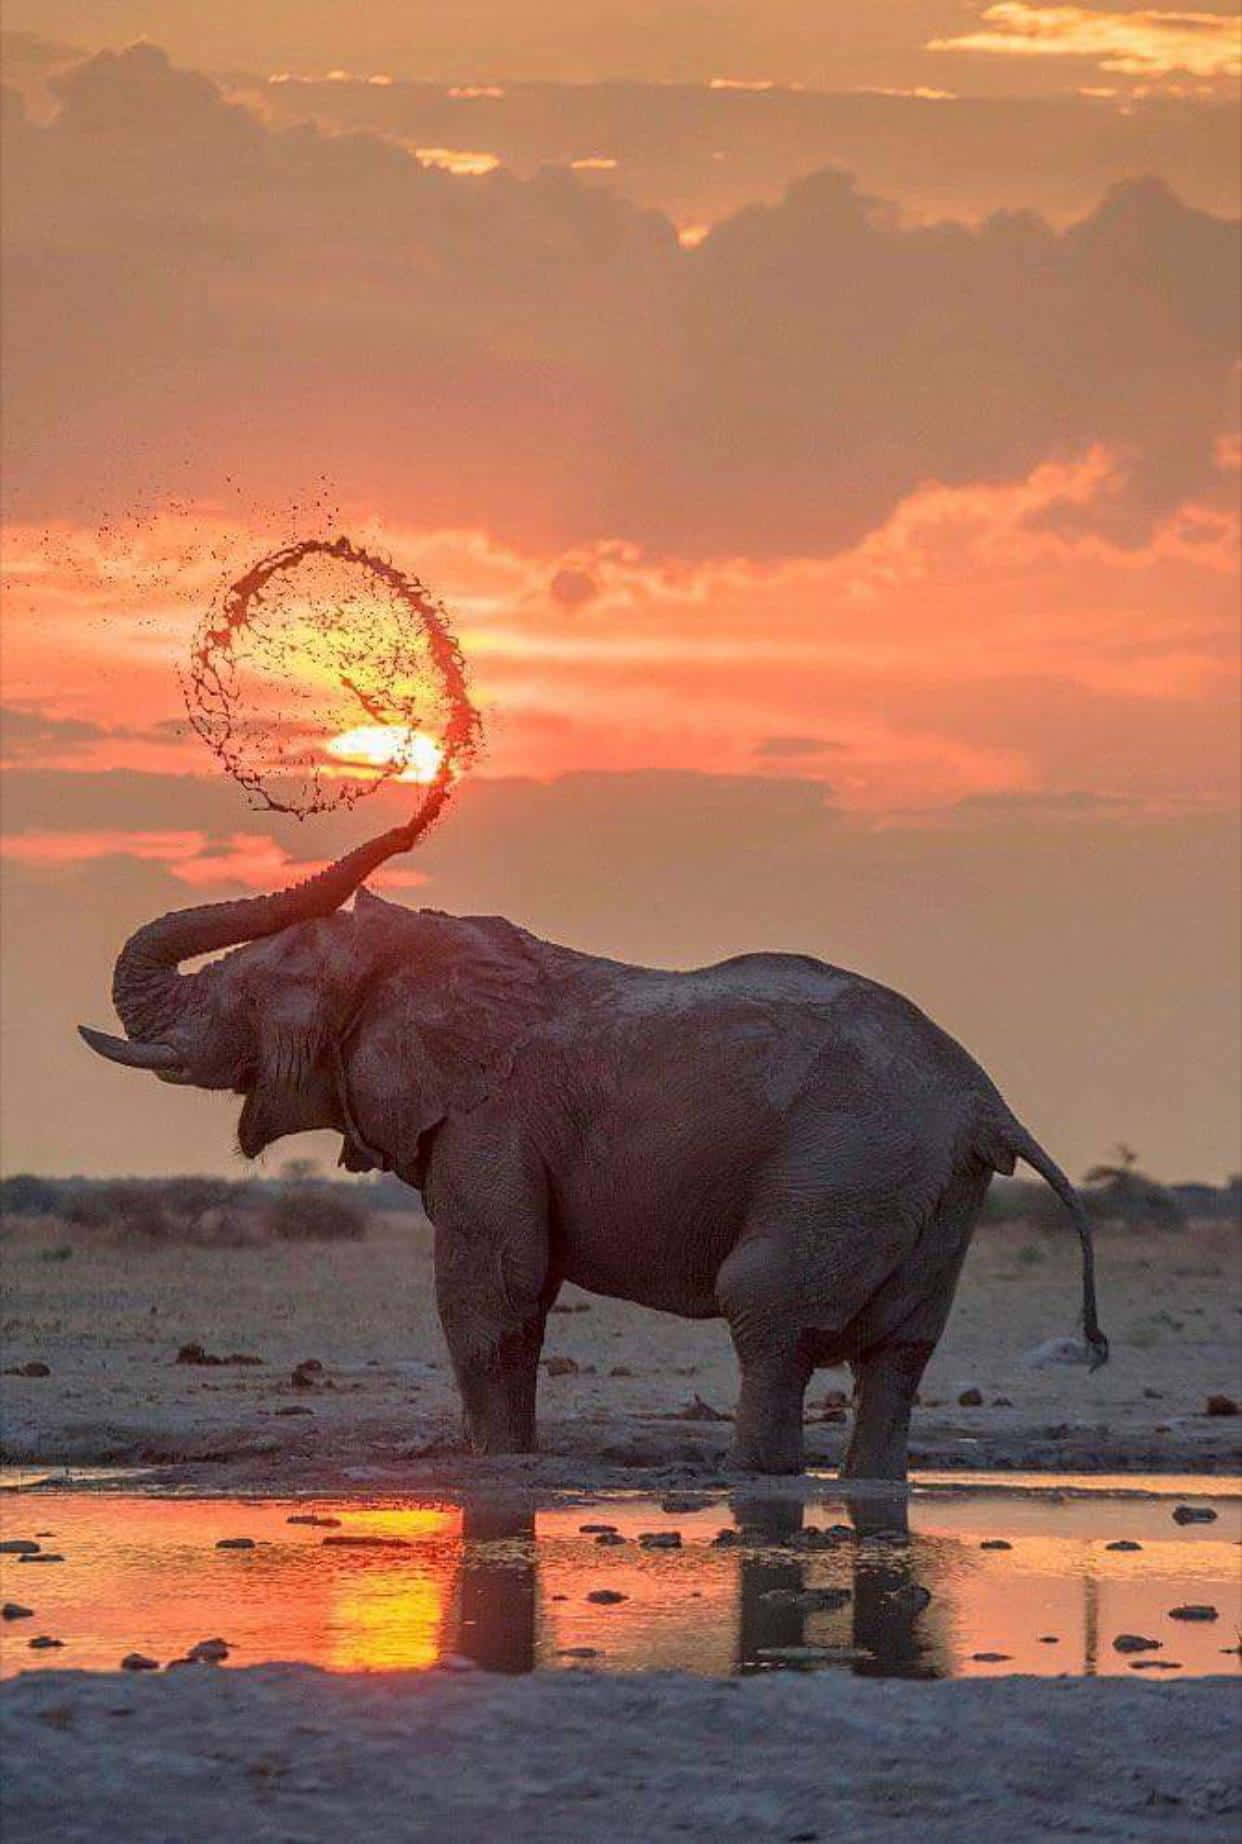 A magnificent elephant peacefully standing in the background